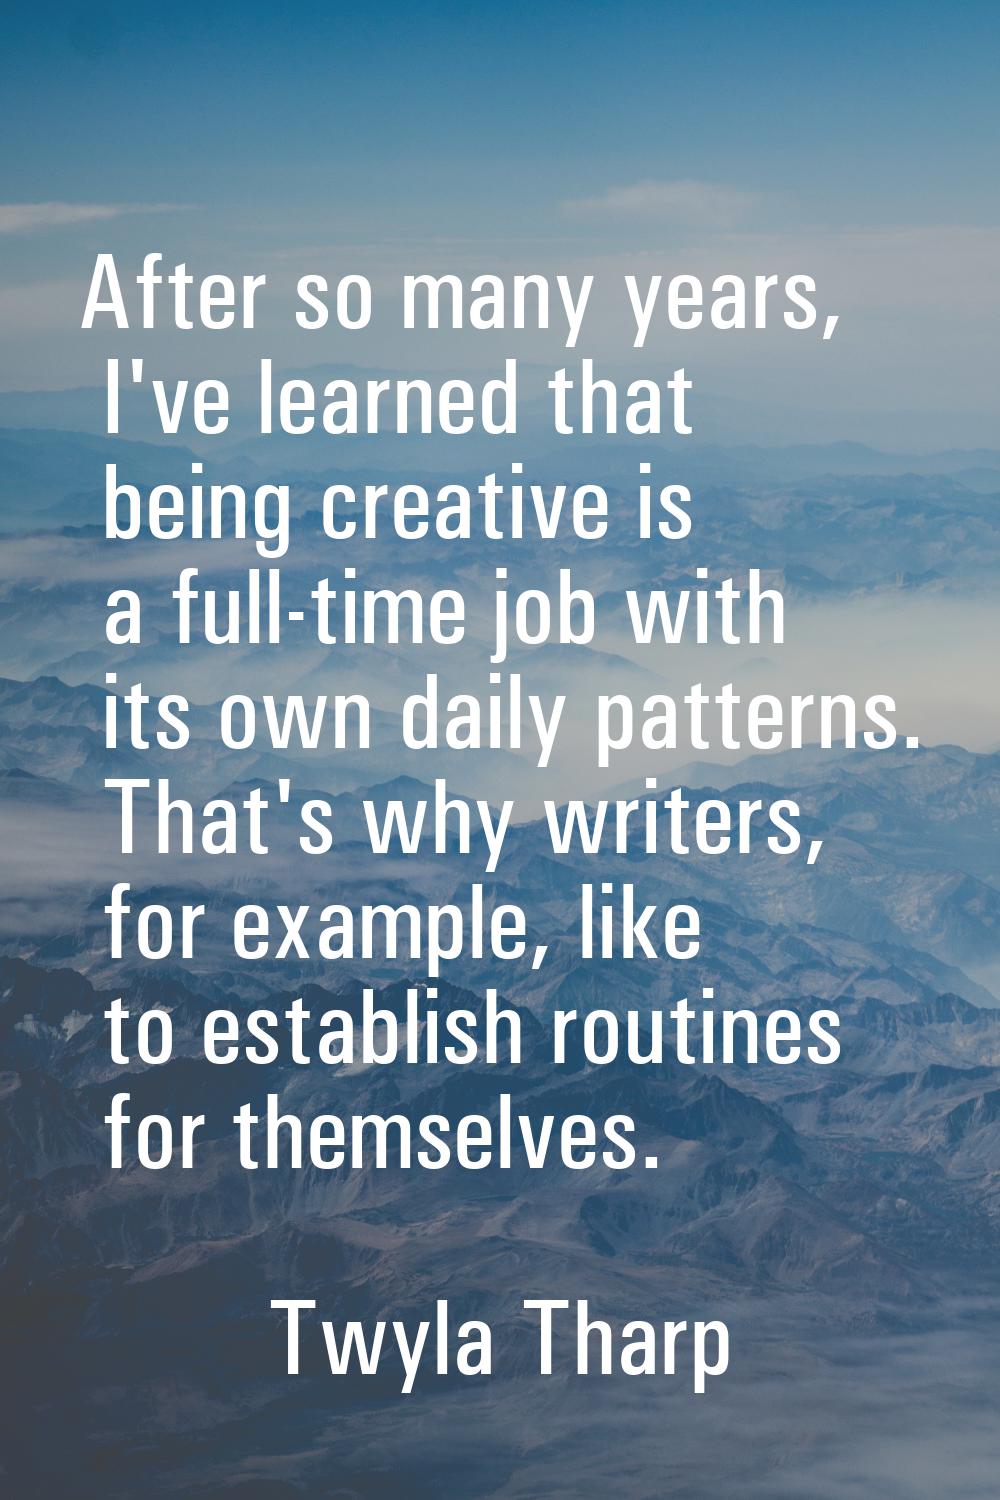 After so many years, I've learned that being creative is a full-time job with its own daily pattern